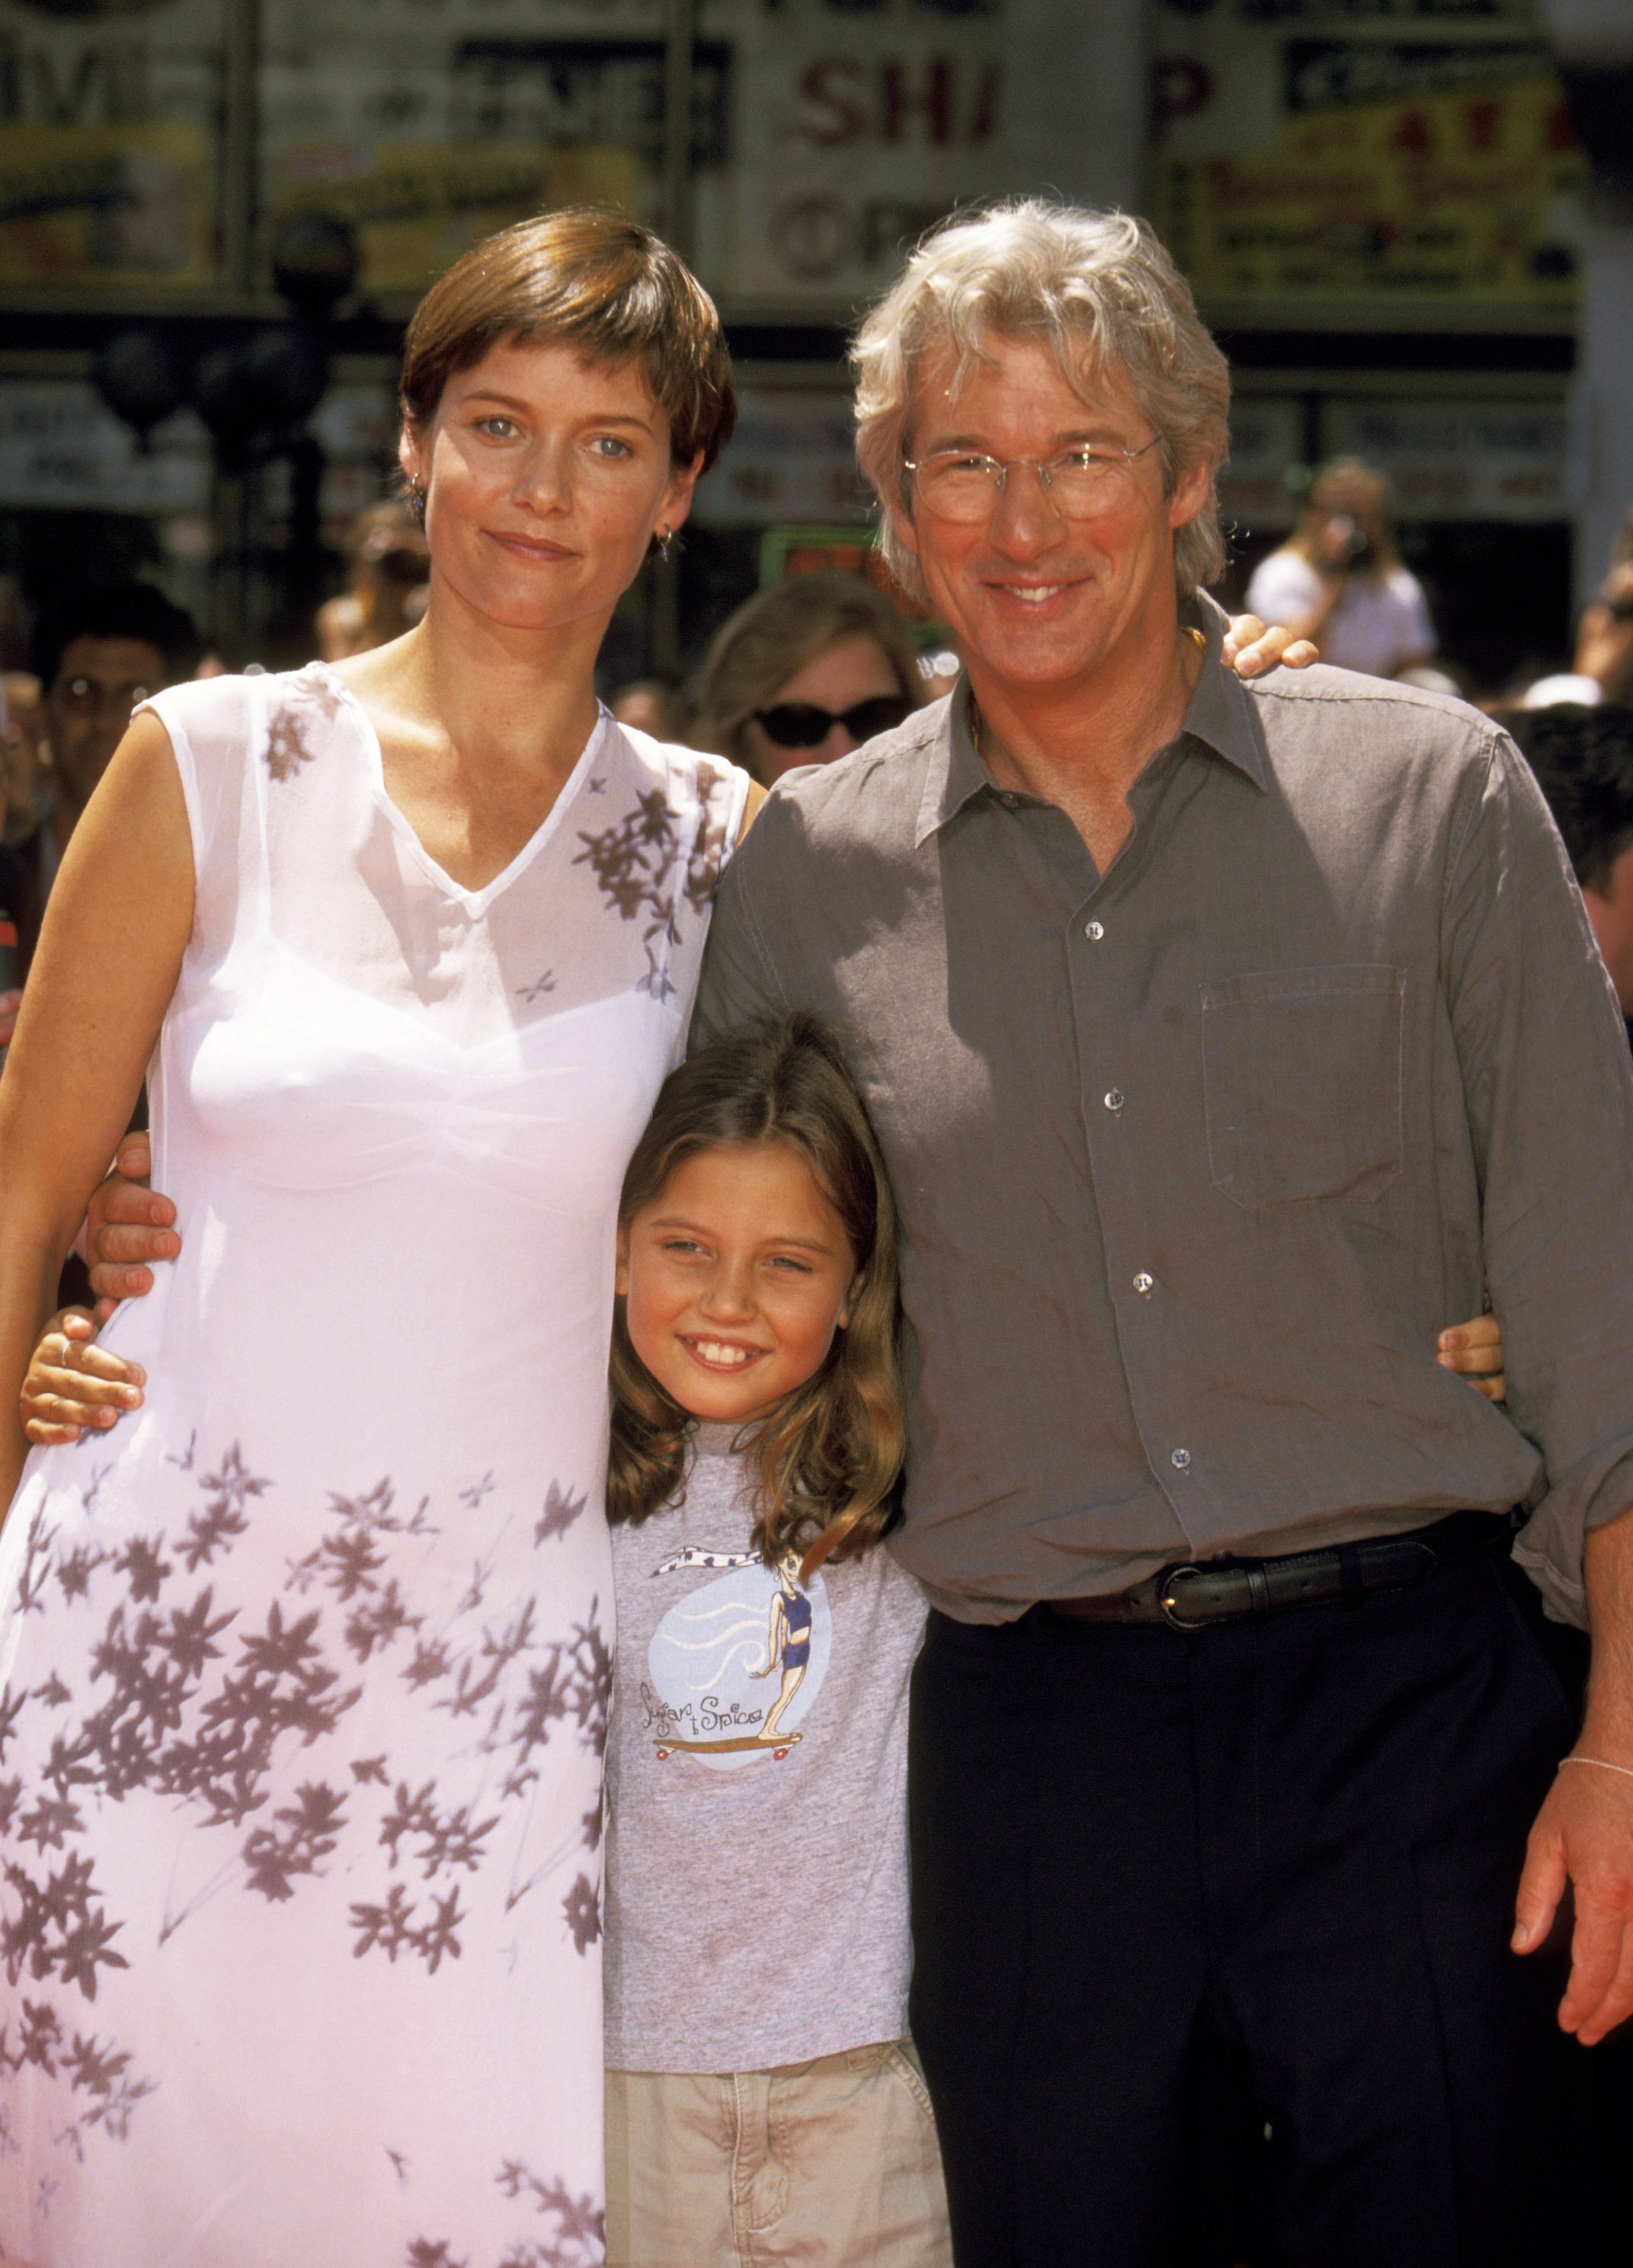 Richard Gere and Carey Lowell with her daughter Hannah in Hollywood 1999. | Source: Getty Images